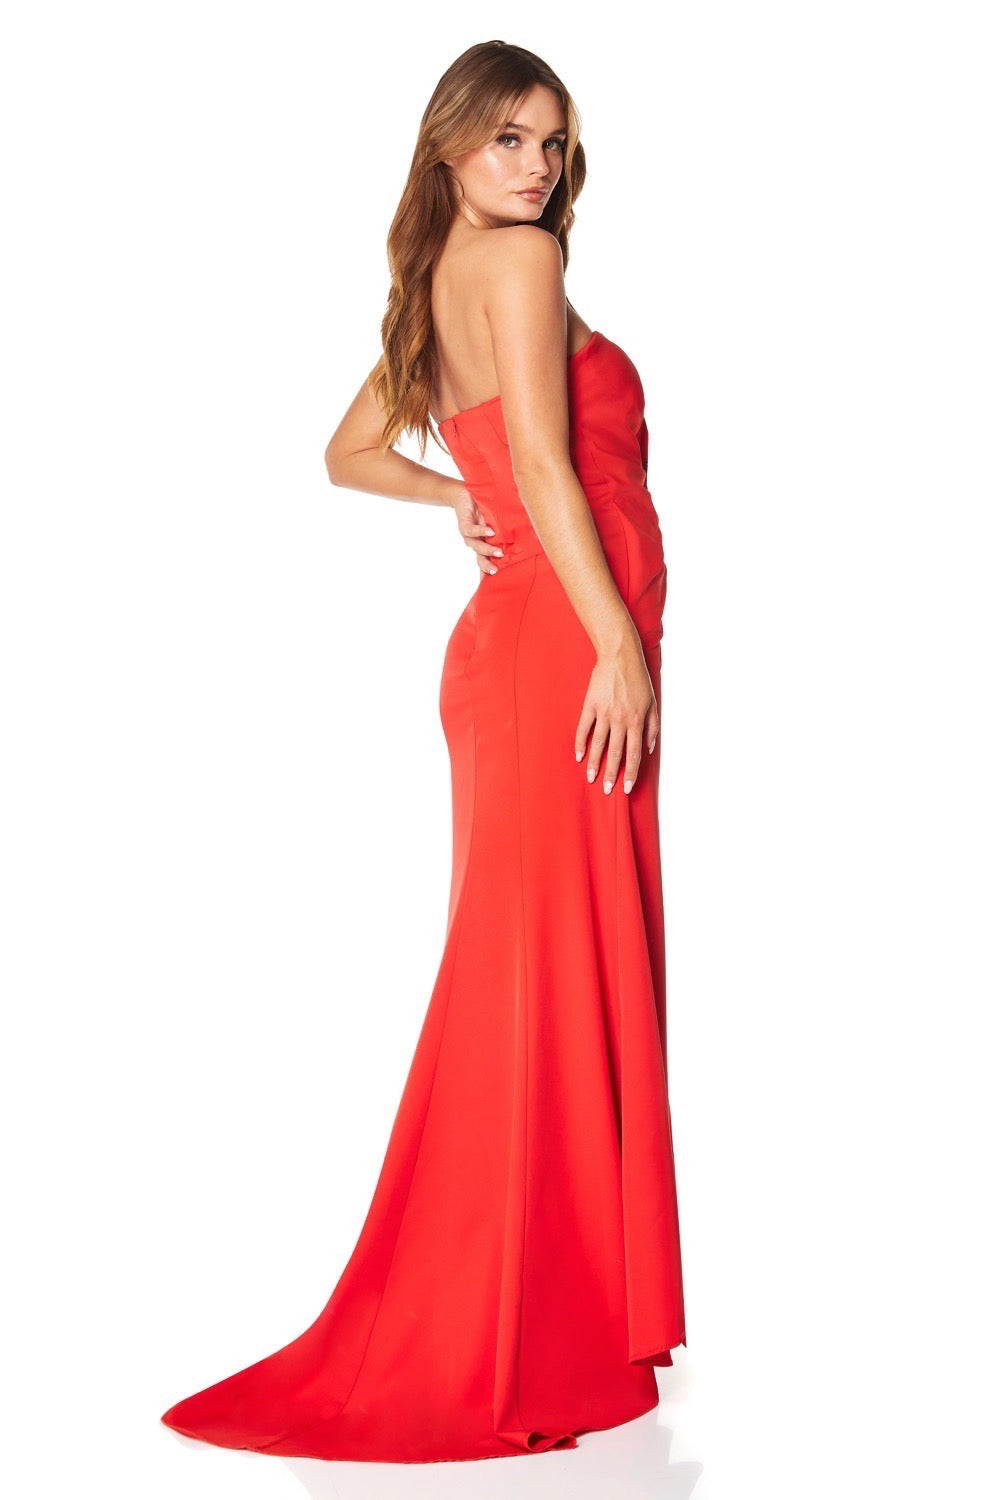 Jarlo Violet ruffle fishtail red maxi dress with thigh split